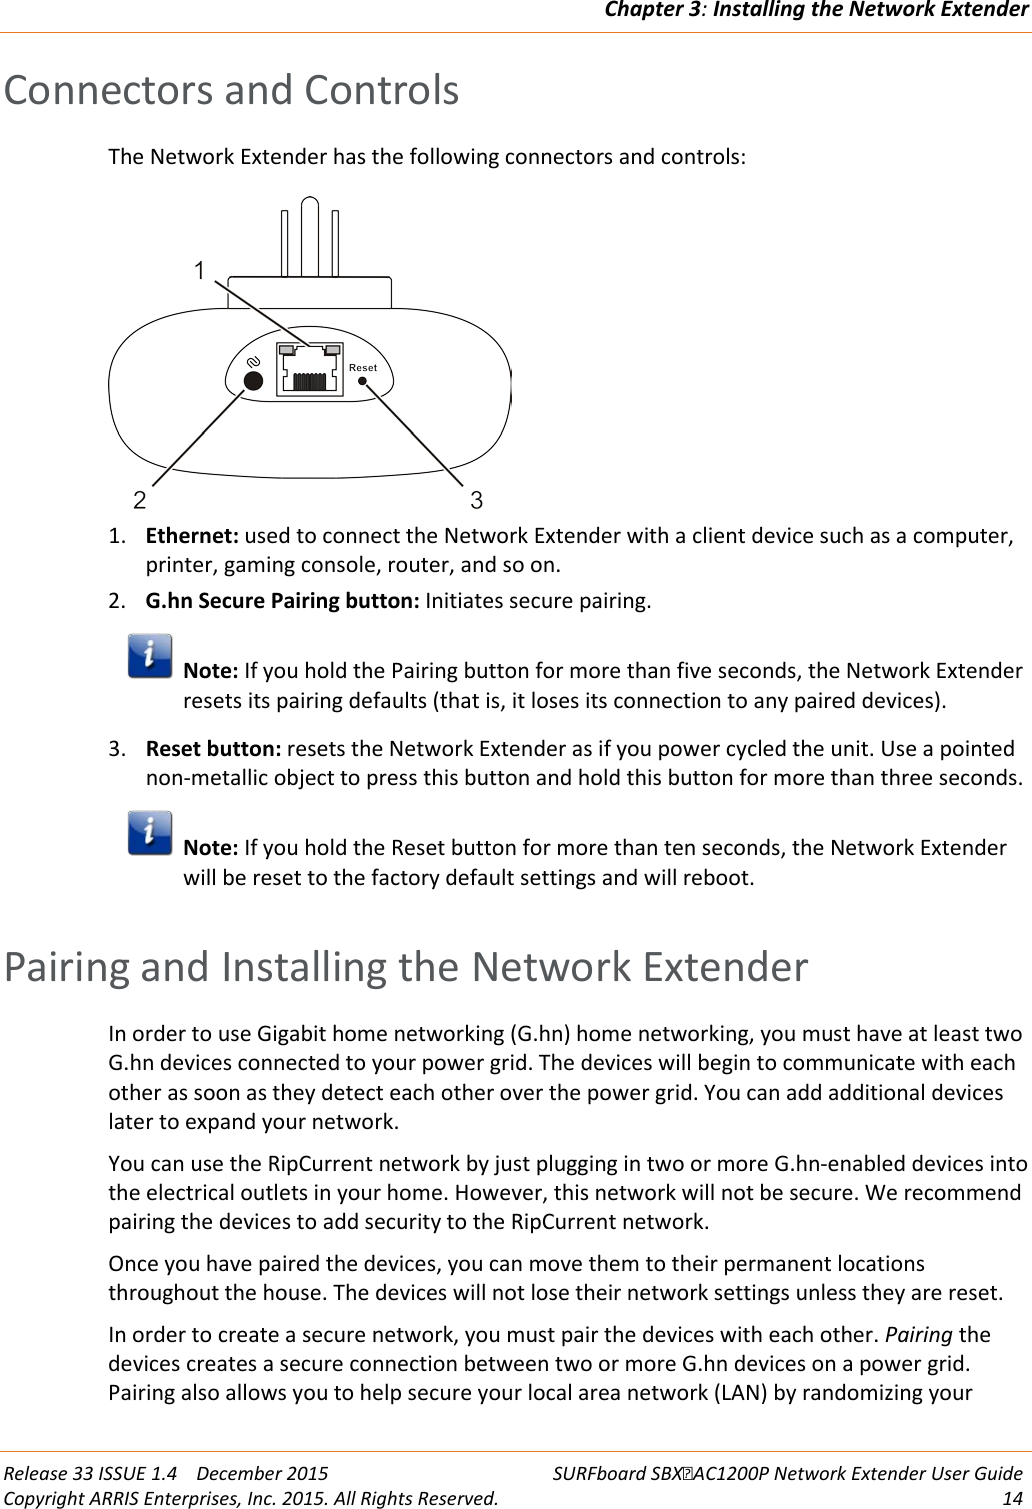 Chapter 3: Installing the Network Extender  Release 33 ISSUE 1.4    December 2015  SURFboard SBXAC1200P Network Extender User Guide Copyright ARRIS Enterprises, Inc. 2015. All Rights Reserved. 14  Connectors and Controls The Network Extender has the following connectors and controls:  1. Ethernet: used to connect the Network Extender with a client device such as a computer, printer, gaming console, router, and so on. 2. G.hn Secure Pairing button: Initiates secure pairing.   Note: If you hold the Pairing button for more than five seconds, the Network Extender resets its pairing defaults (that is, it loses its connection to any paired devices). 3. Reset button: resets the Network Extender as if you power cycled the unit. Use a pointed non-metallic object to press this button and hold this button for more than three seconds.  Note: If you hold the Reset button for more than ten seconds, the Network Extender will be reset to the factory default settings and will reboot.   Pairing and Installing the Network Extender In order to use Gigabit home networking (G.hn) home networking, you must have at least two G.hn devices connected to your power grid. The devices will begin to communicate with each other as soon as they detect each other over the power grid. You can add additional devices later to expand your network. You can use the RipCurrent network by just plugging in two or more G.hn-enabled devices into the electrical outlets in your home. However, this network will not be secure. We recommend pairing the devices to add security to the RipCurrent network. Once you have paired the devices, you can move them to their permanent locations throughout the house. The devices will not lose their network settings unless they are reset. In order to create a secure network, you must pair the devices with each other. Pairing the devices creates a secure connection between two or more G.hn devices on a power grid. Pairing also allows you to help secure your local area network (LAN) by randomizing your 